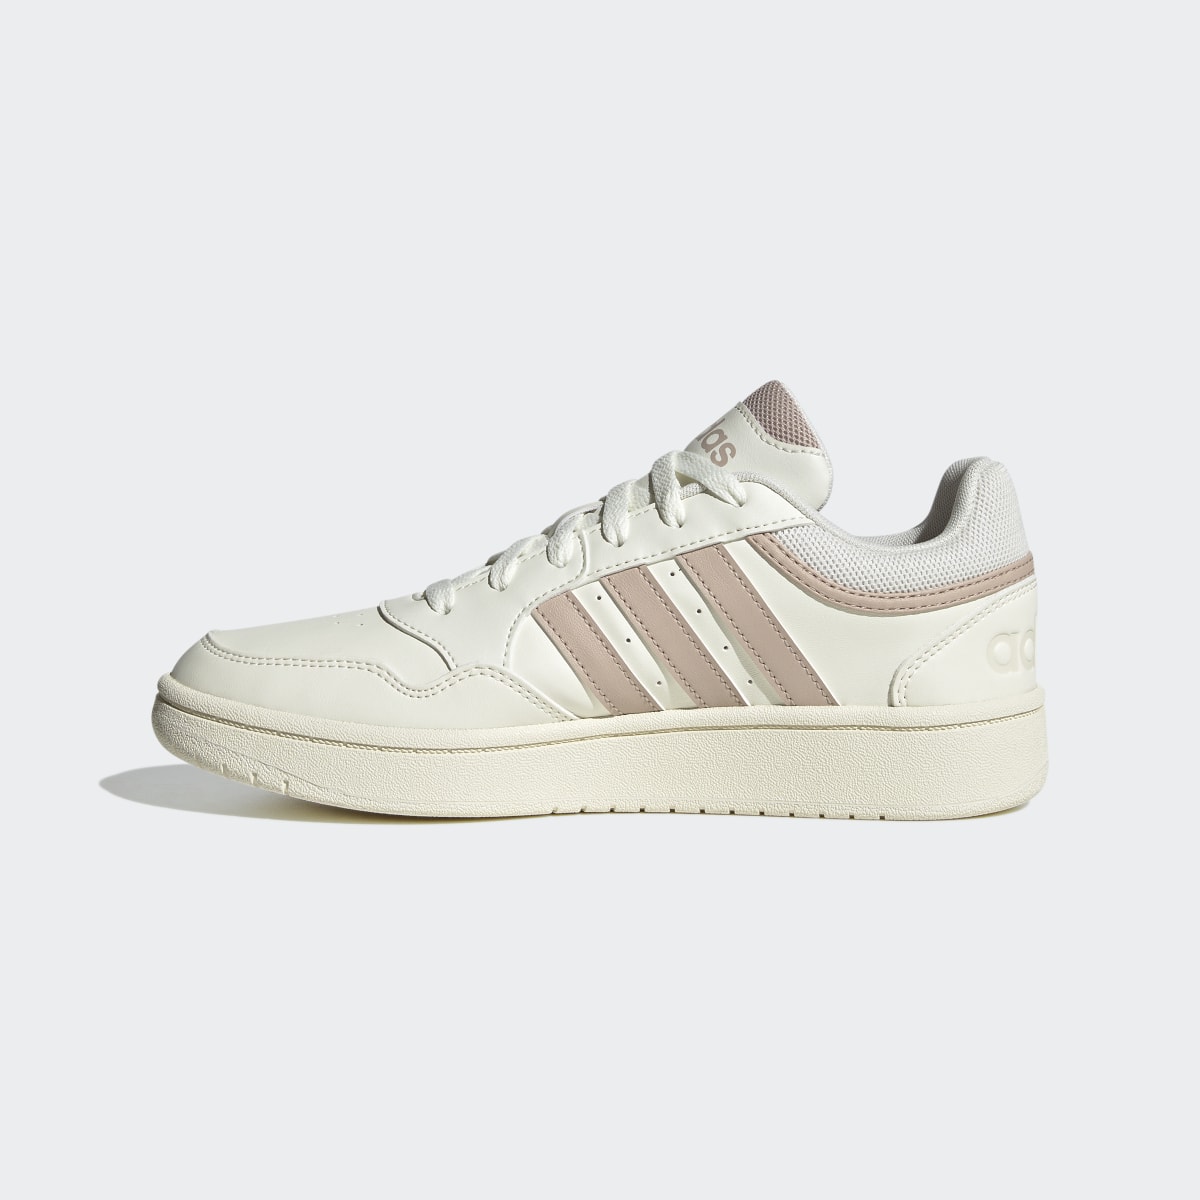 Adidas Hoops 3.0 Mid Lifestyle Basketball Low Shoes. 7